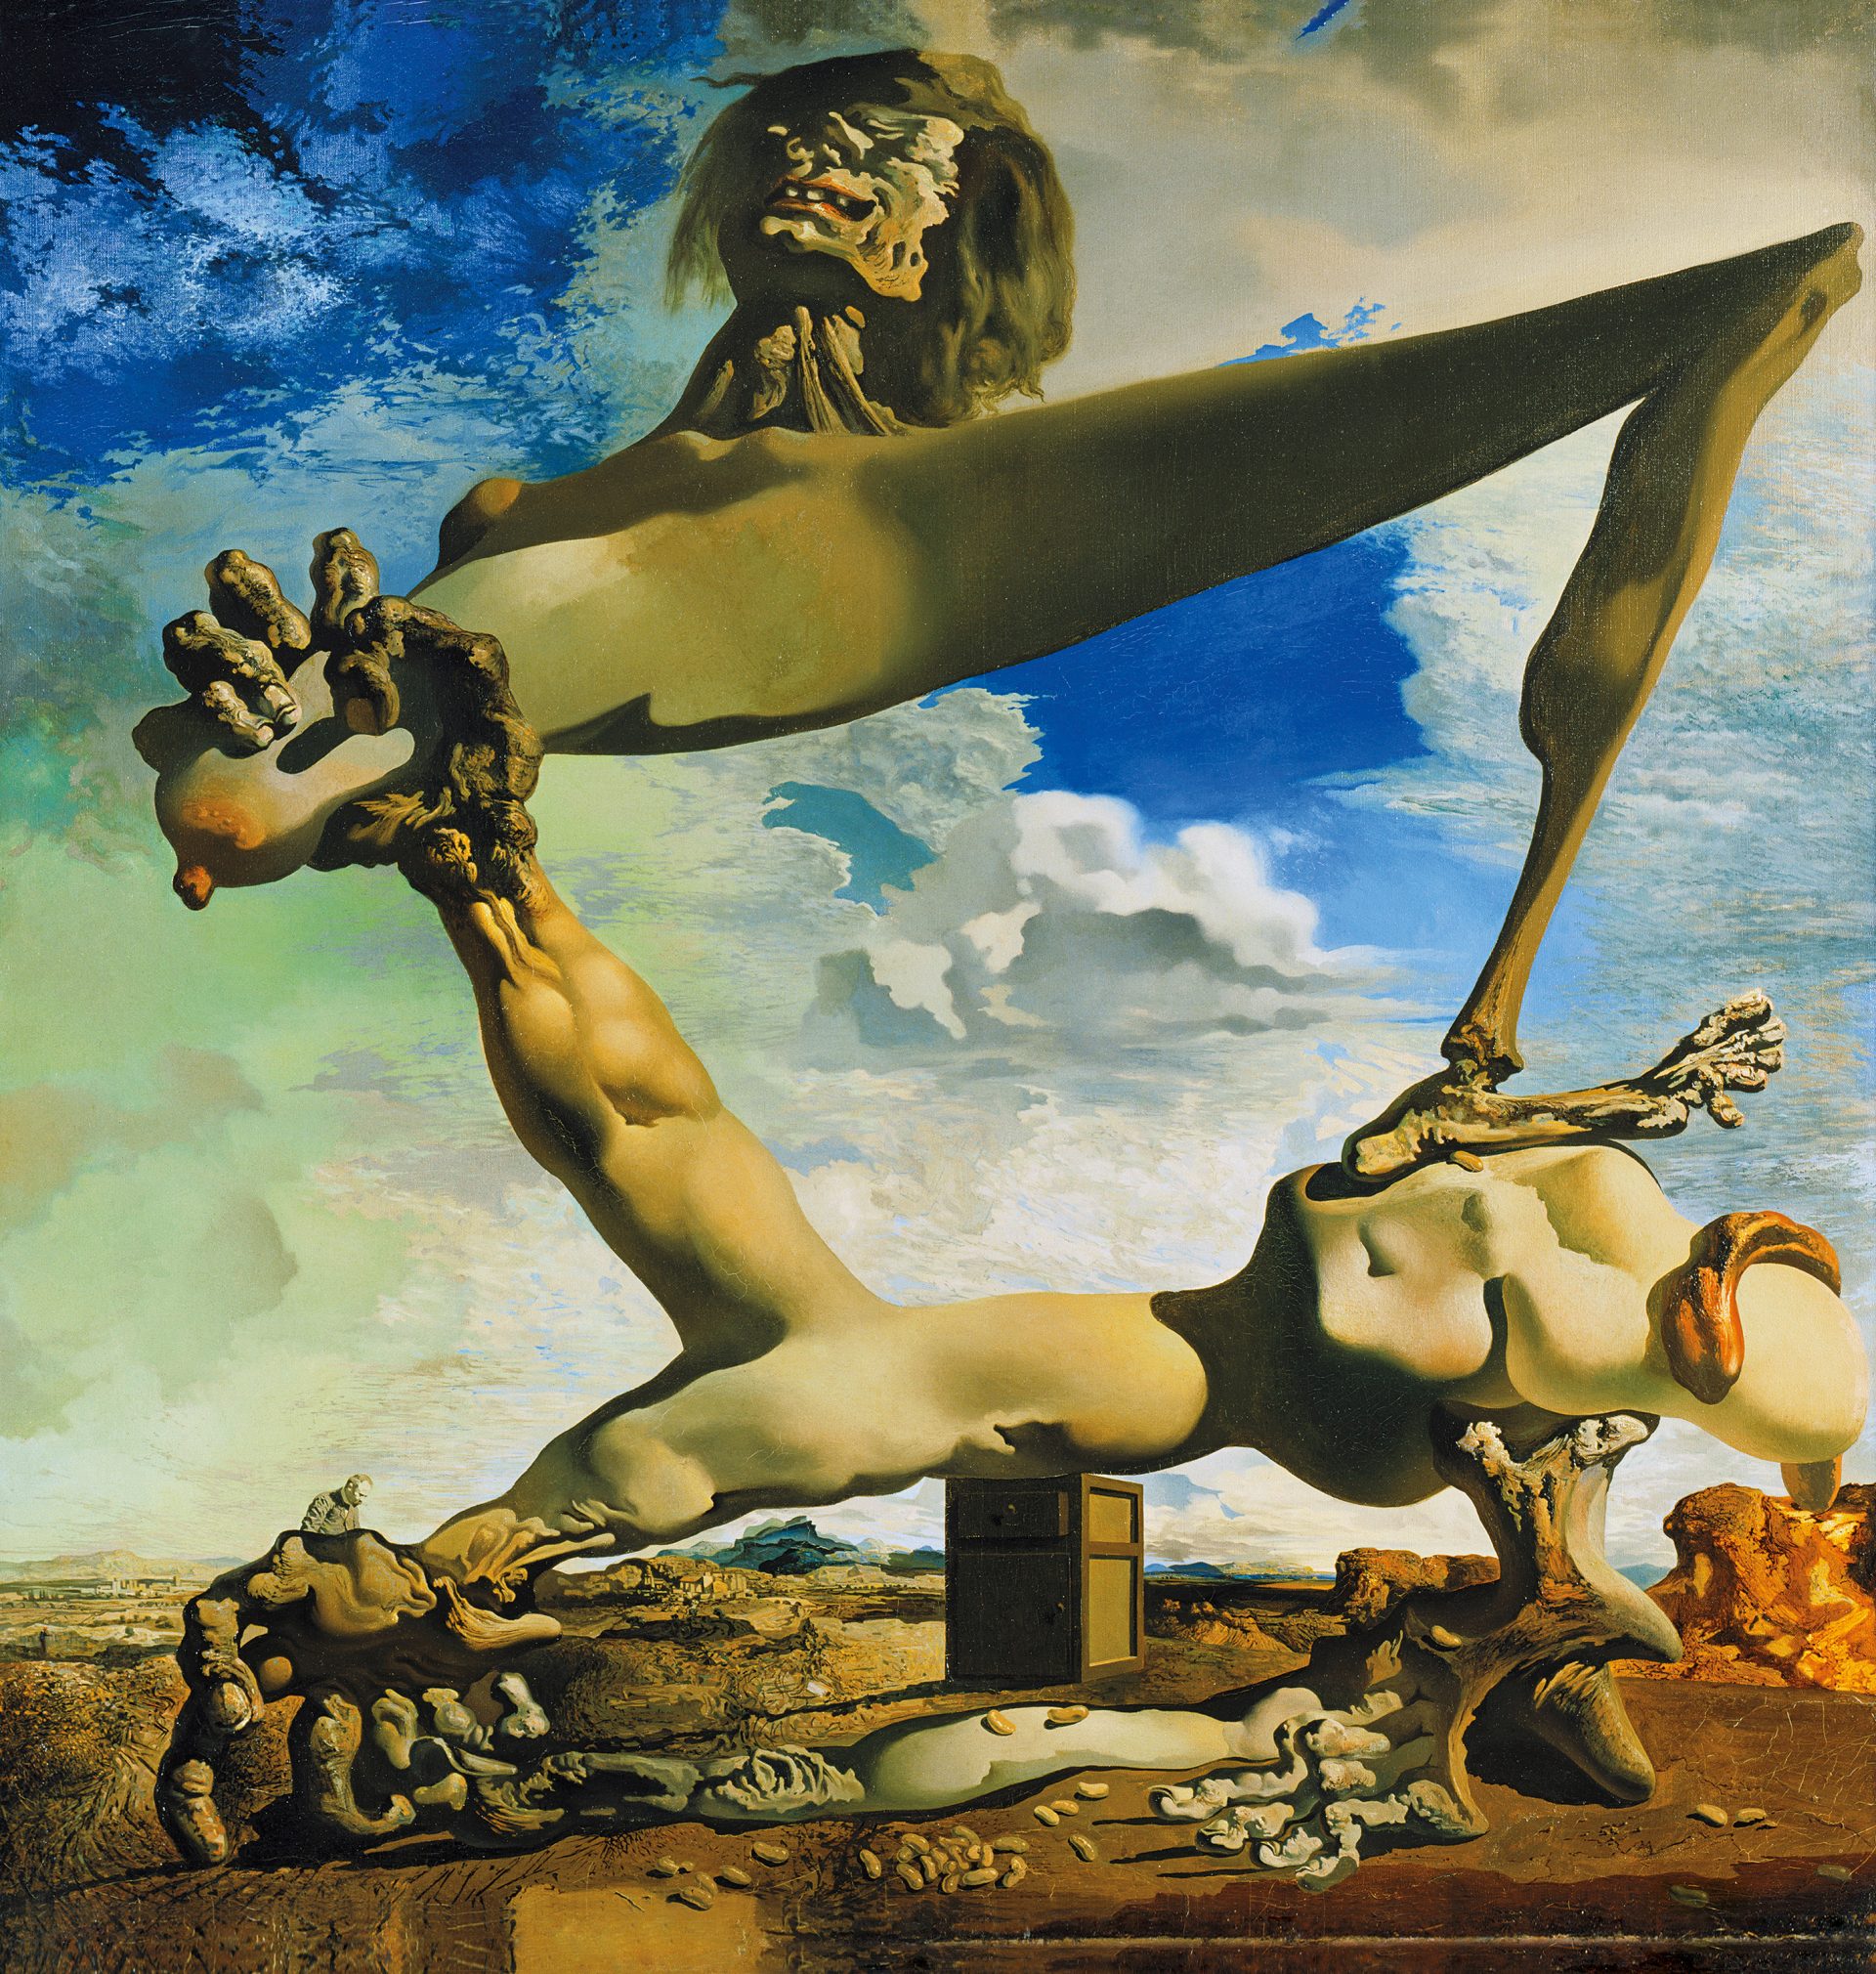 The image is a painting by Salvador Dali titled “Soft Construction with Boiled Beans (Premonition of Civil War)”. The painting is an oil on canvas and was completed in 1936. The painting is a surrealist depiction of a distorted human figure with elongated limbs and a distorted face. The figure is holding a bunch of boiled beans in its hand. The background is a landscape with a blue sky and clouds. The painting is a commentary on the Spanish Civil War.